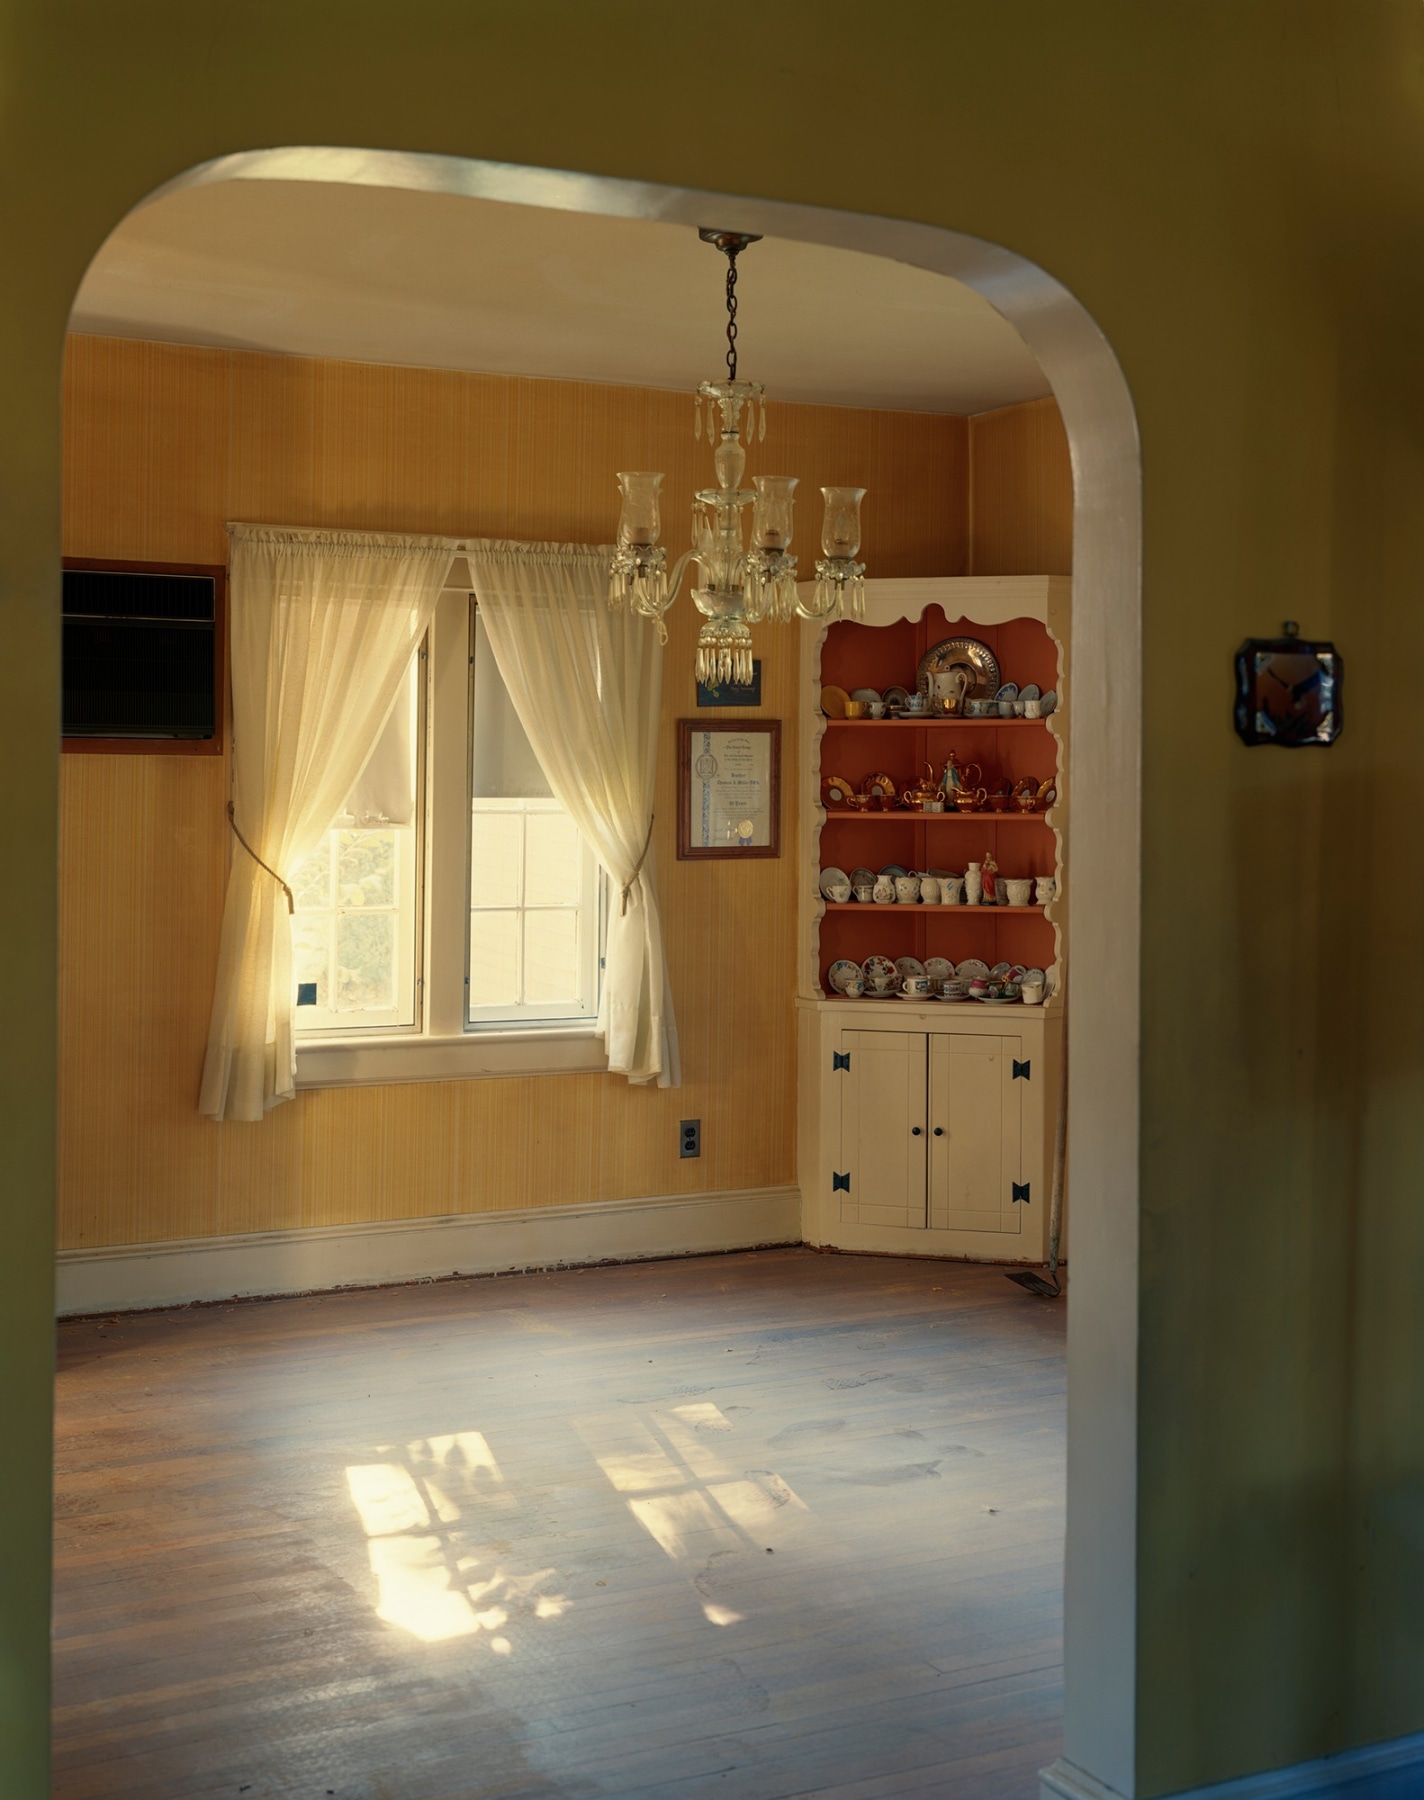 Photograph of empty dinning room with sunlight and arched doorway, by Jade Doskow